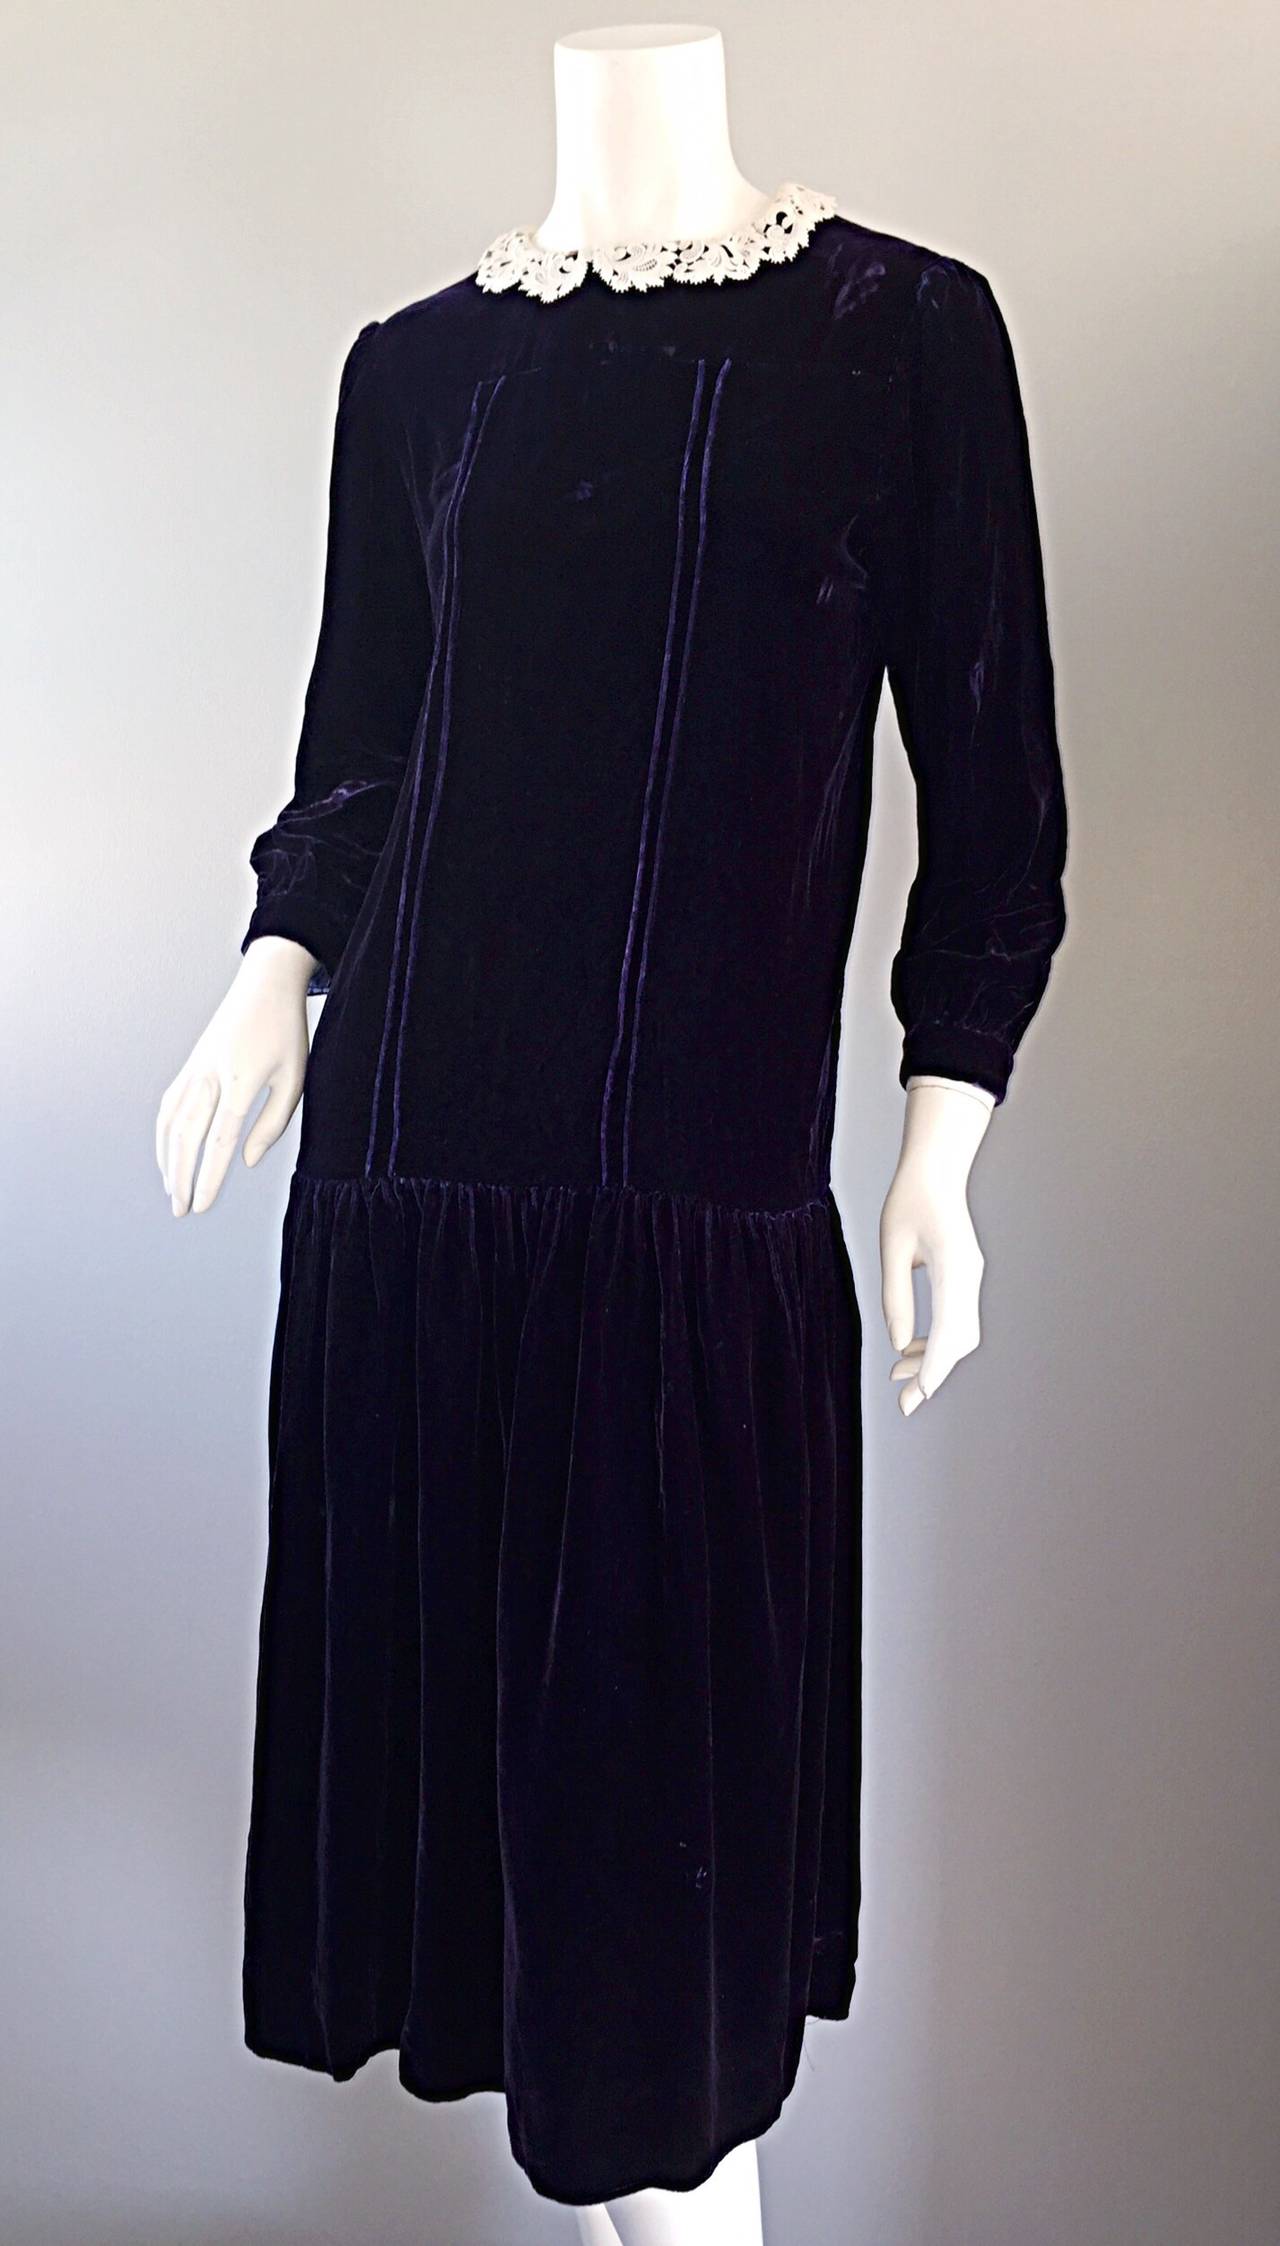 1920s Purple Eggplant Vintage Roaring 20s Velvet Flapper Dress w/ Lace Collar In Excellent Condition For Sale In San Diego, CA